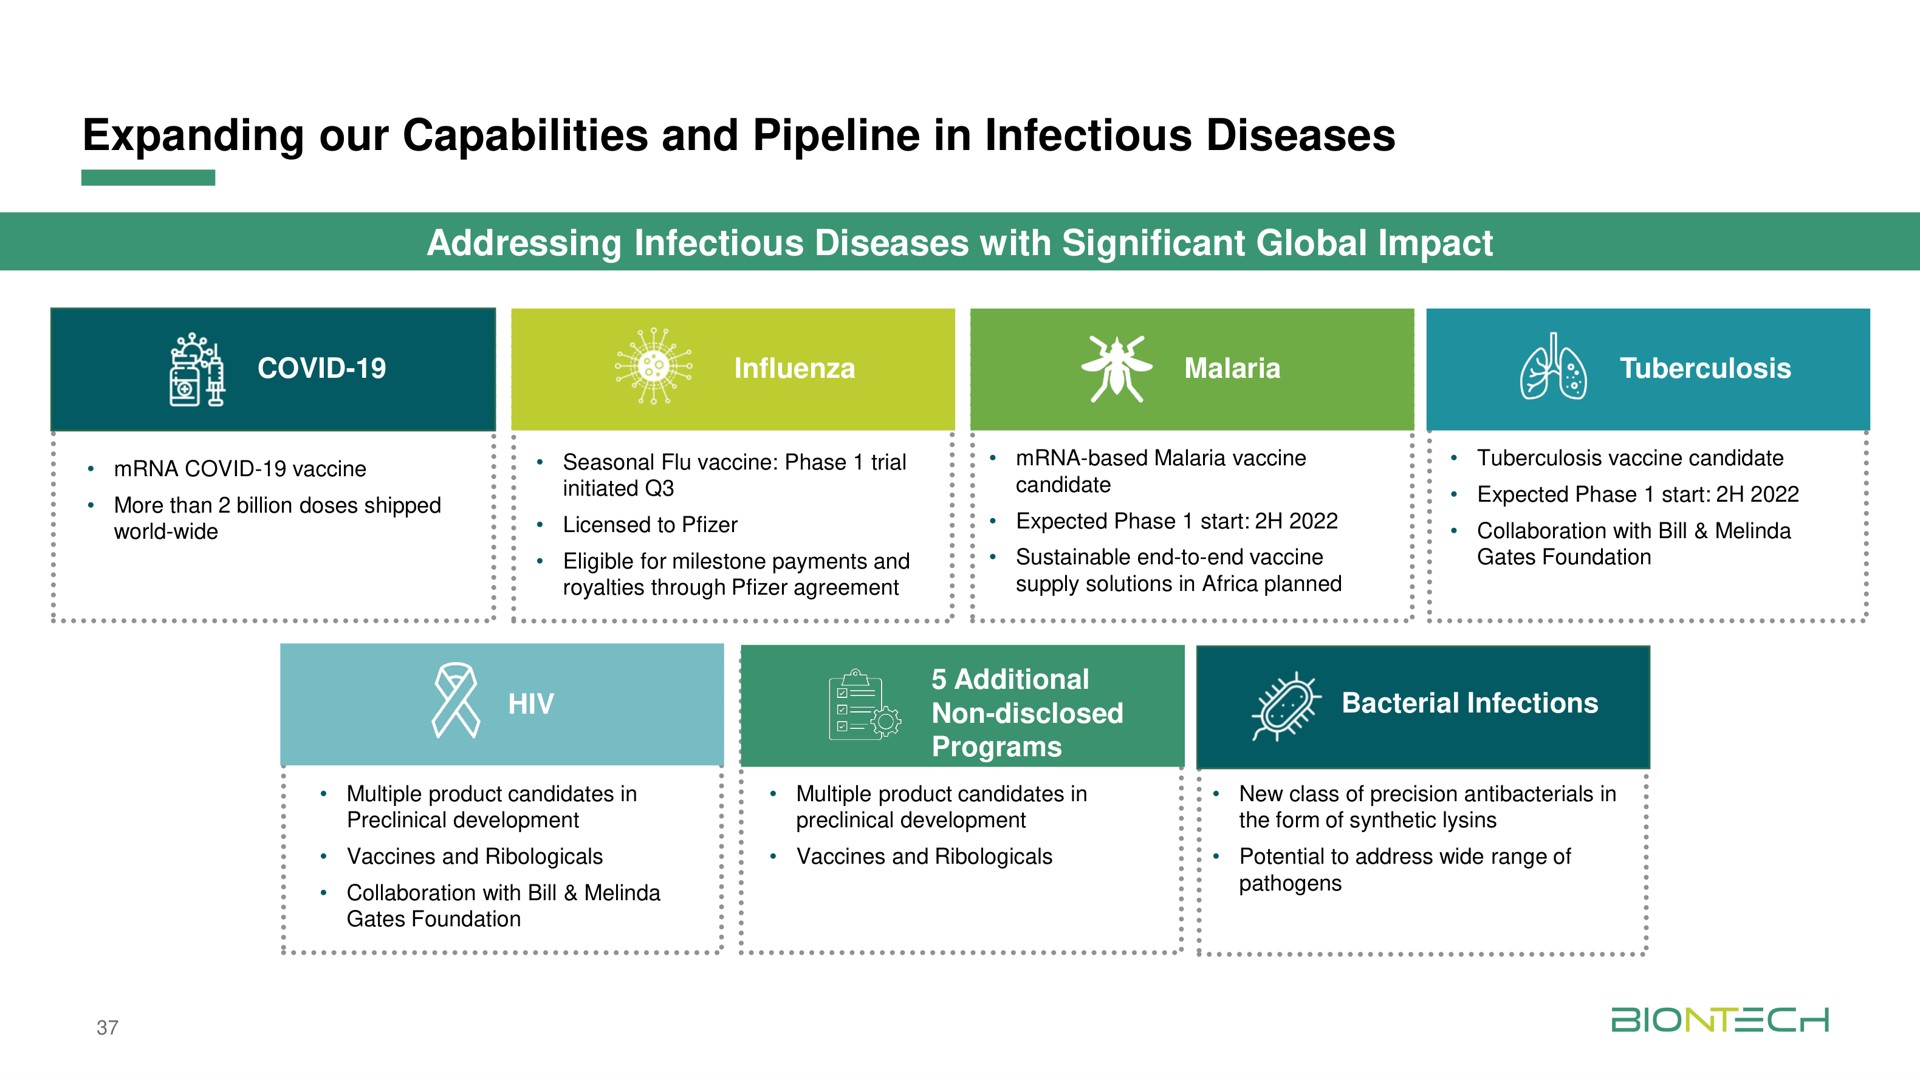 expanding our capabilities and pipeline in infectious diseases addressing infectious diseases with significant global impact | BioNTech